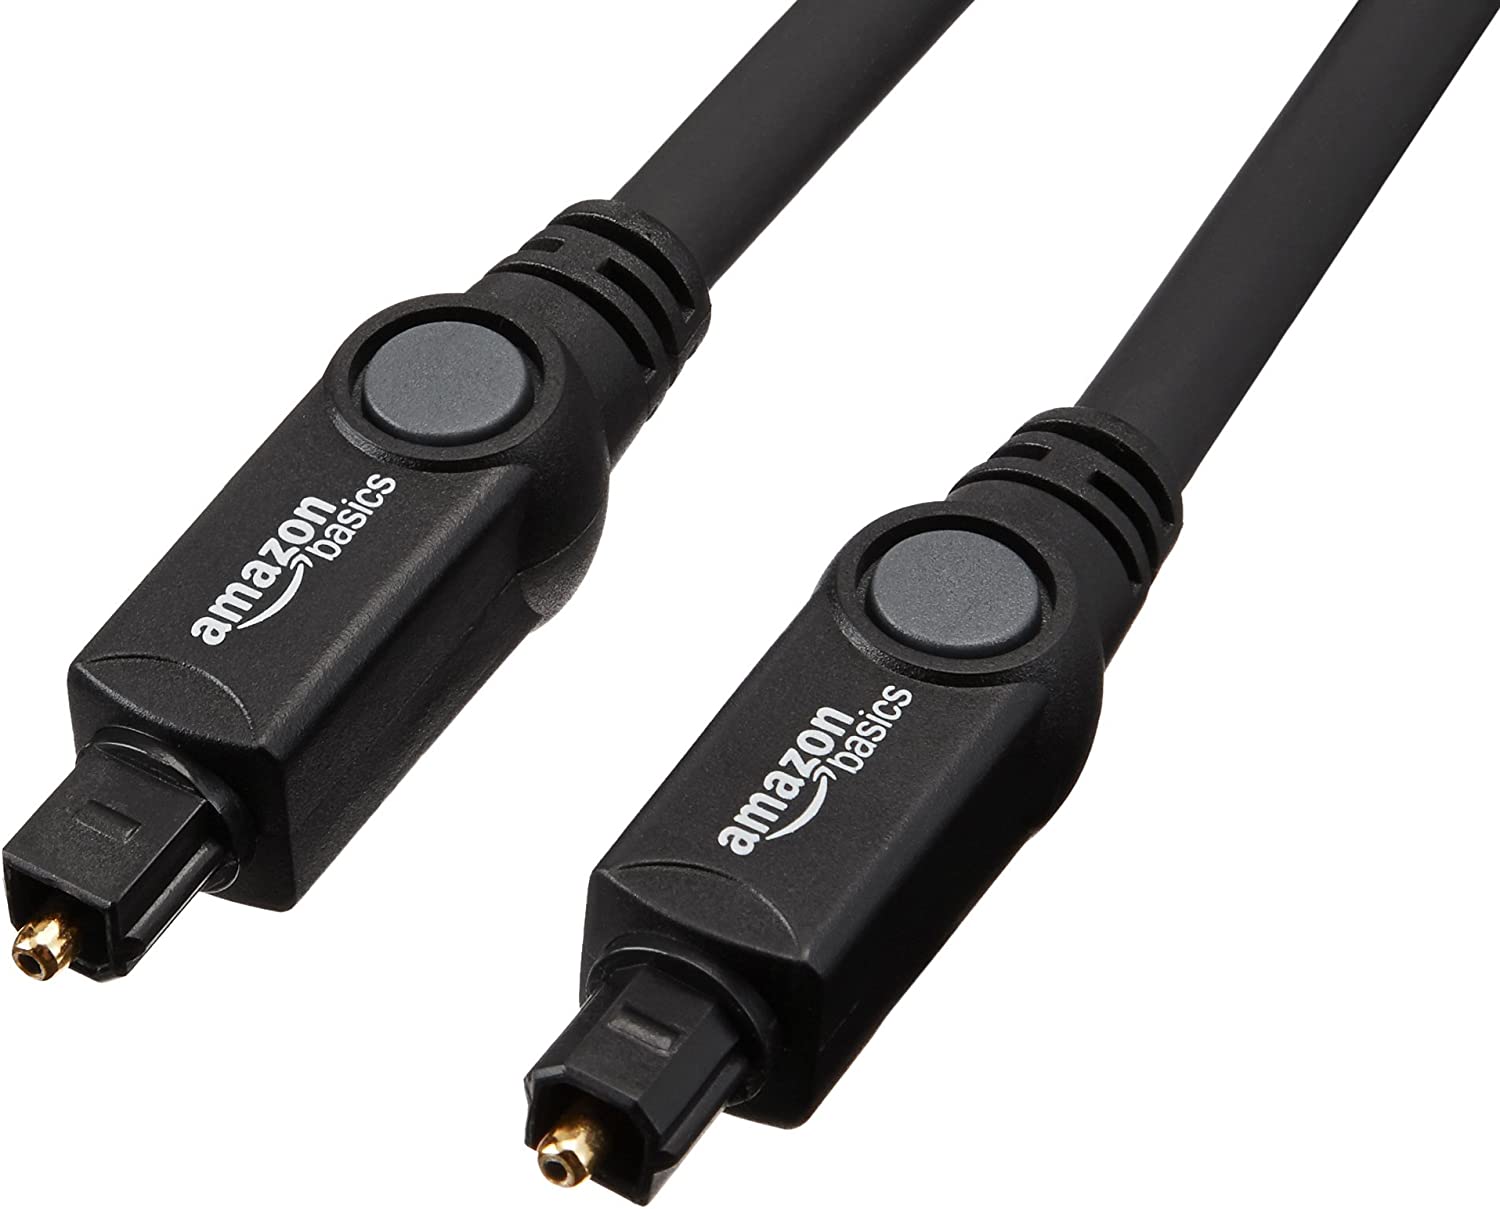 toslink cable for audio product comparison